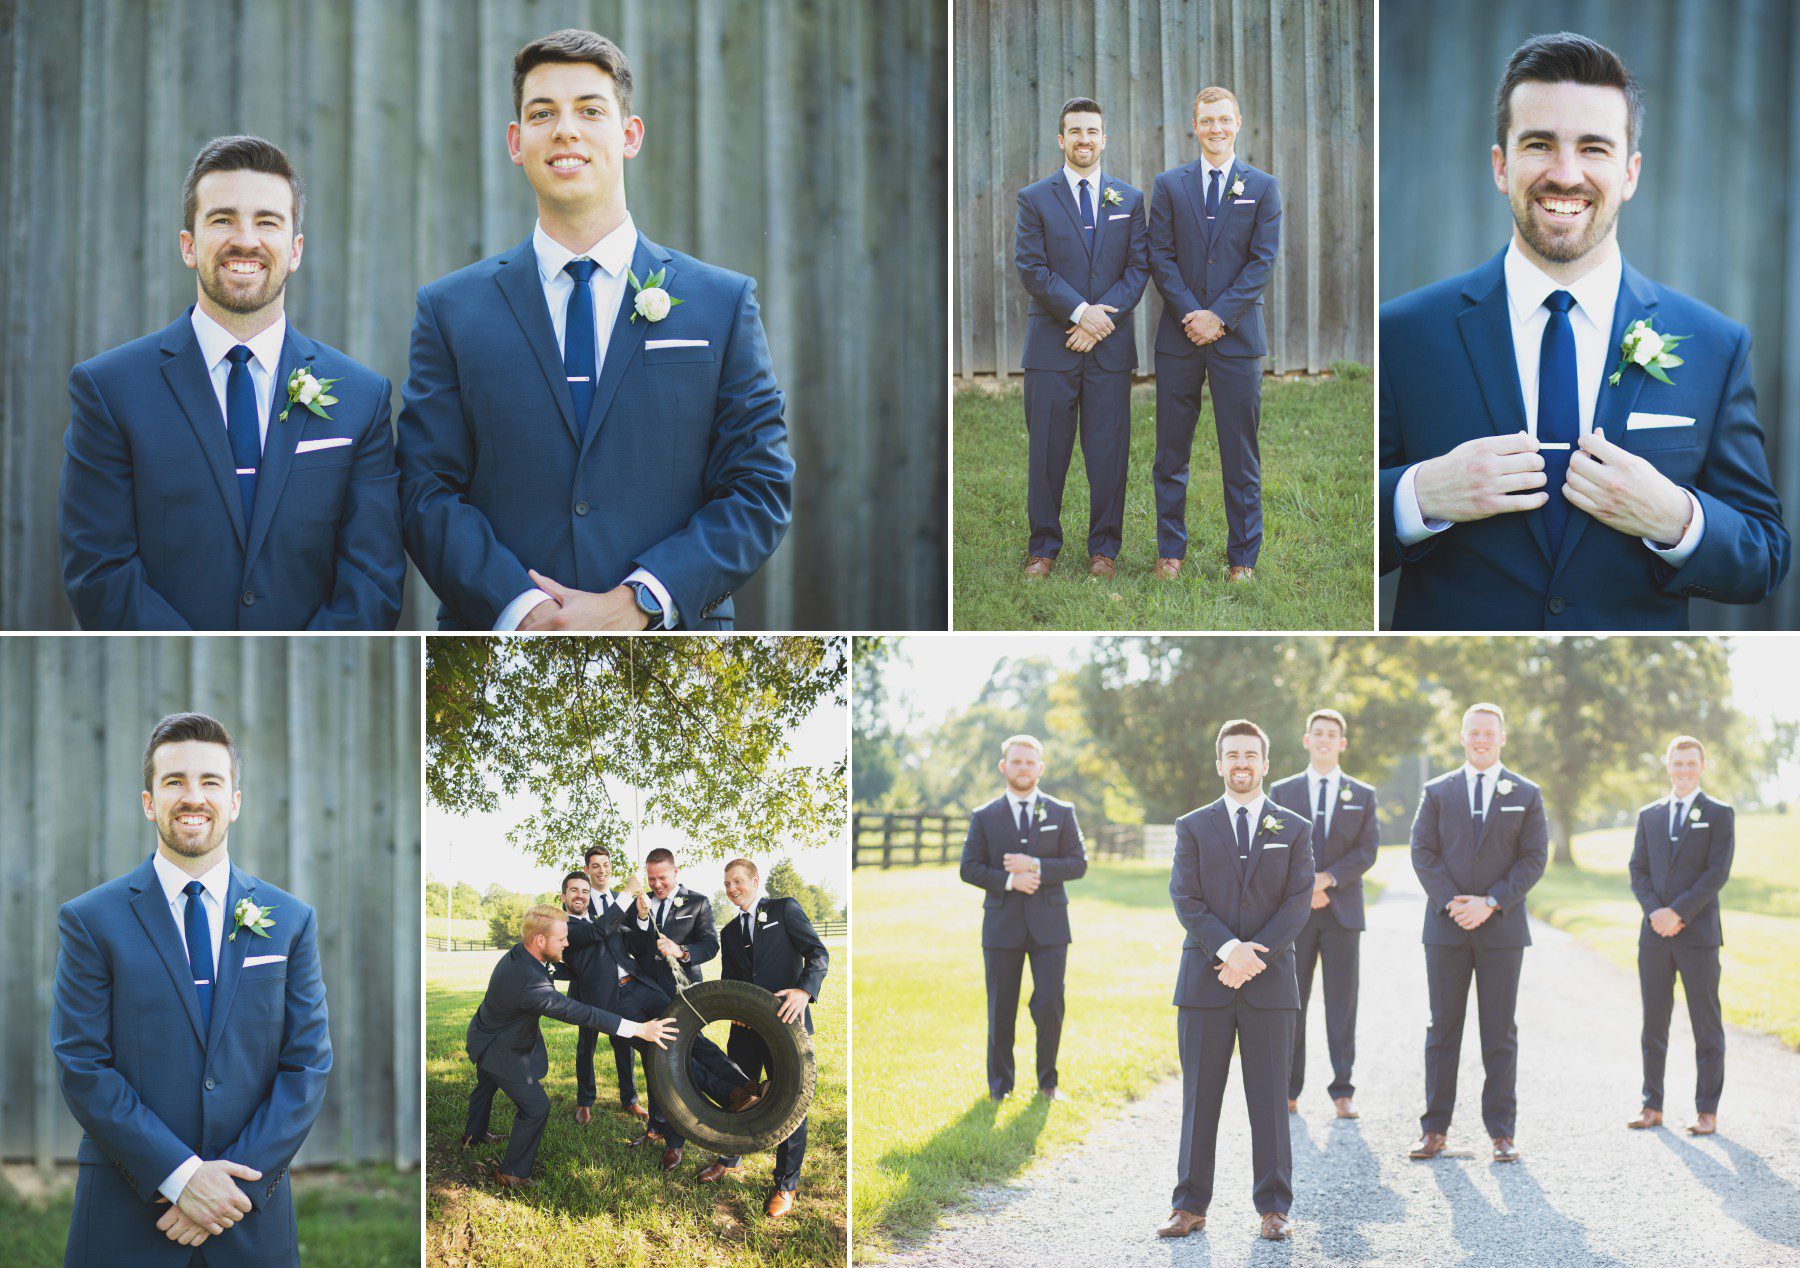 Groomsmen hang out and do photos before wedding at Front Porch Farms